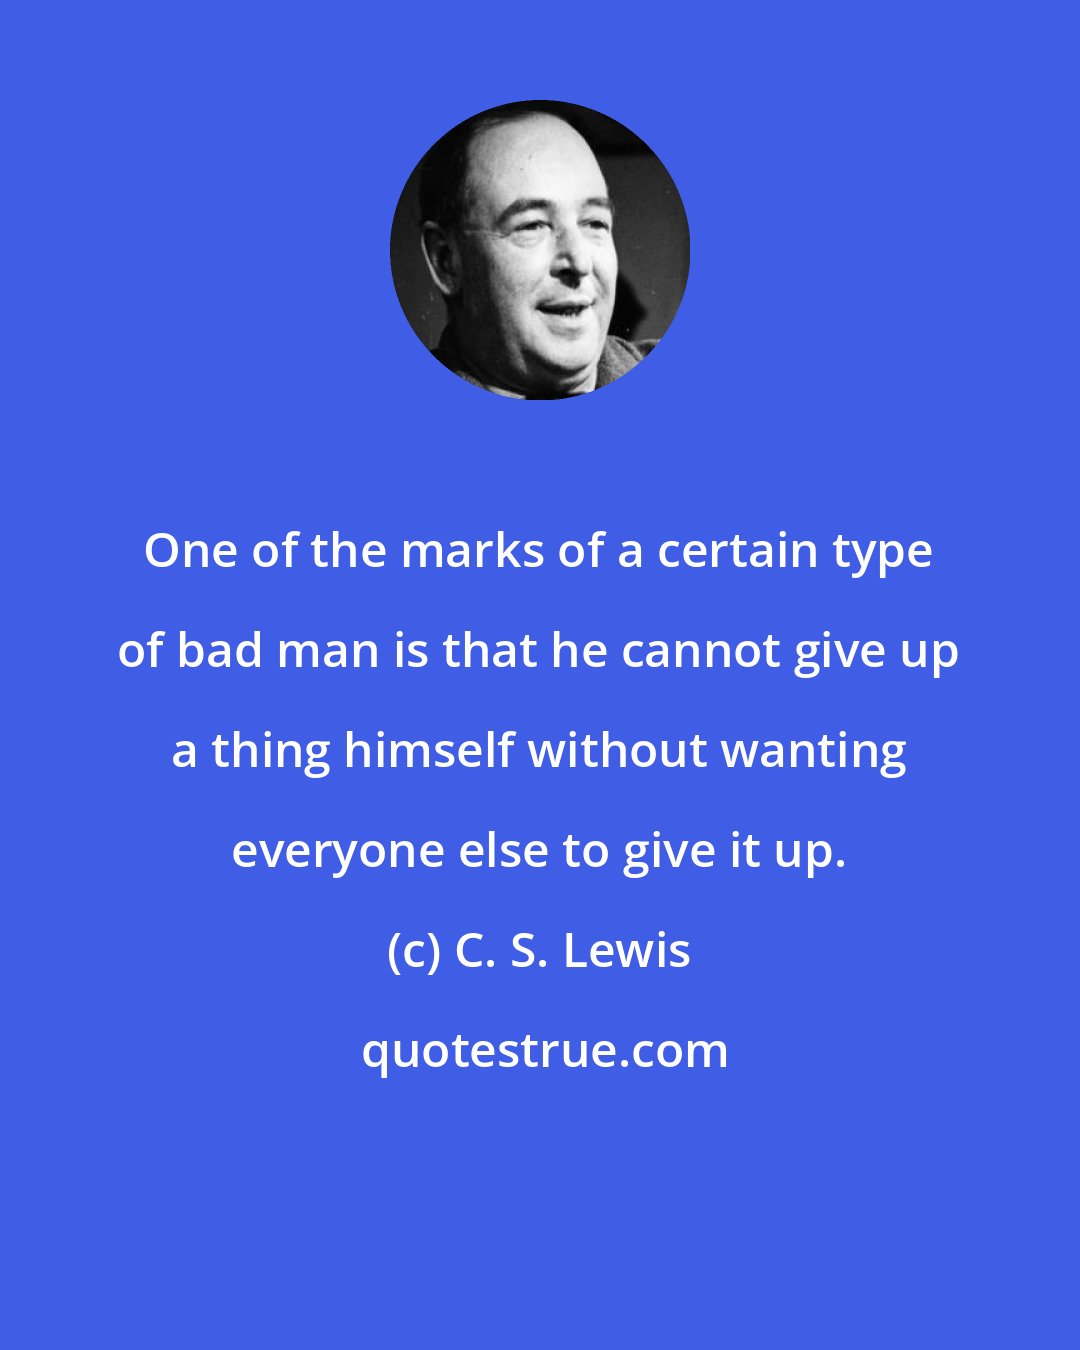 C. S. Lewis: One of the marks of a certain type of bad man is that he cannot give up a thing himself without wanting everyone else to give it up.